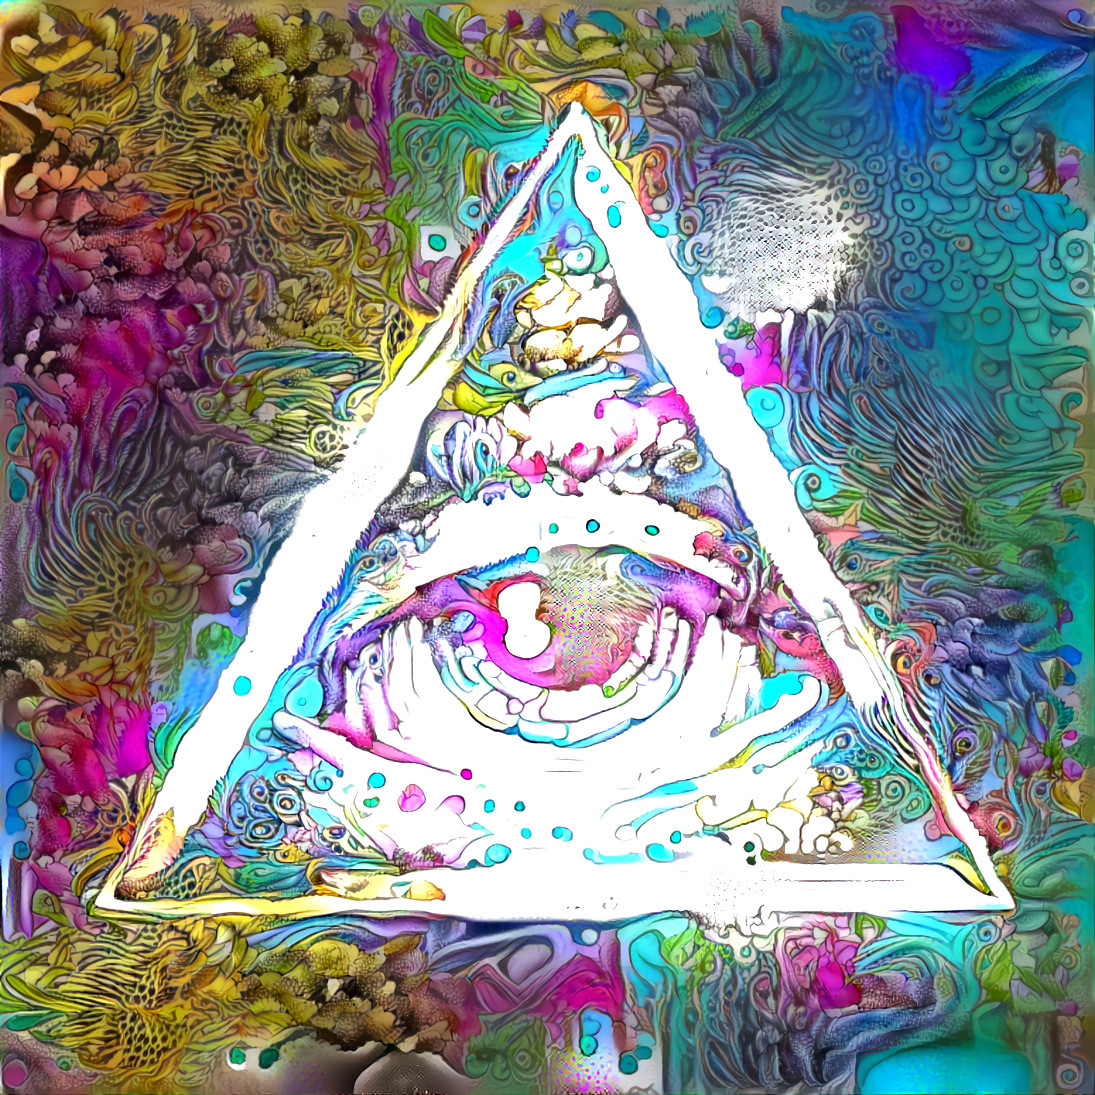 “All Seeing”